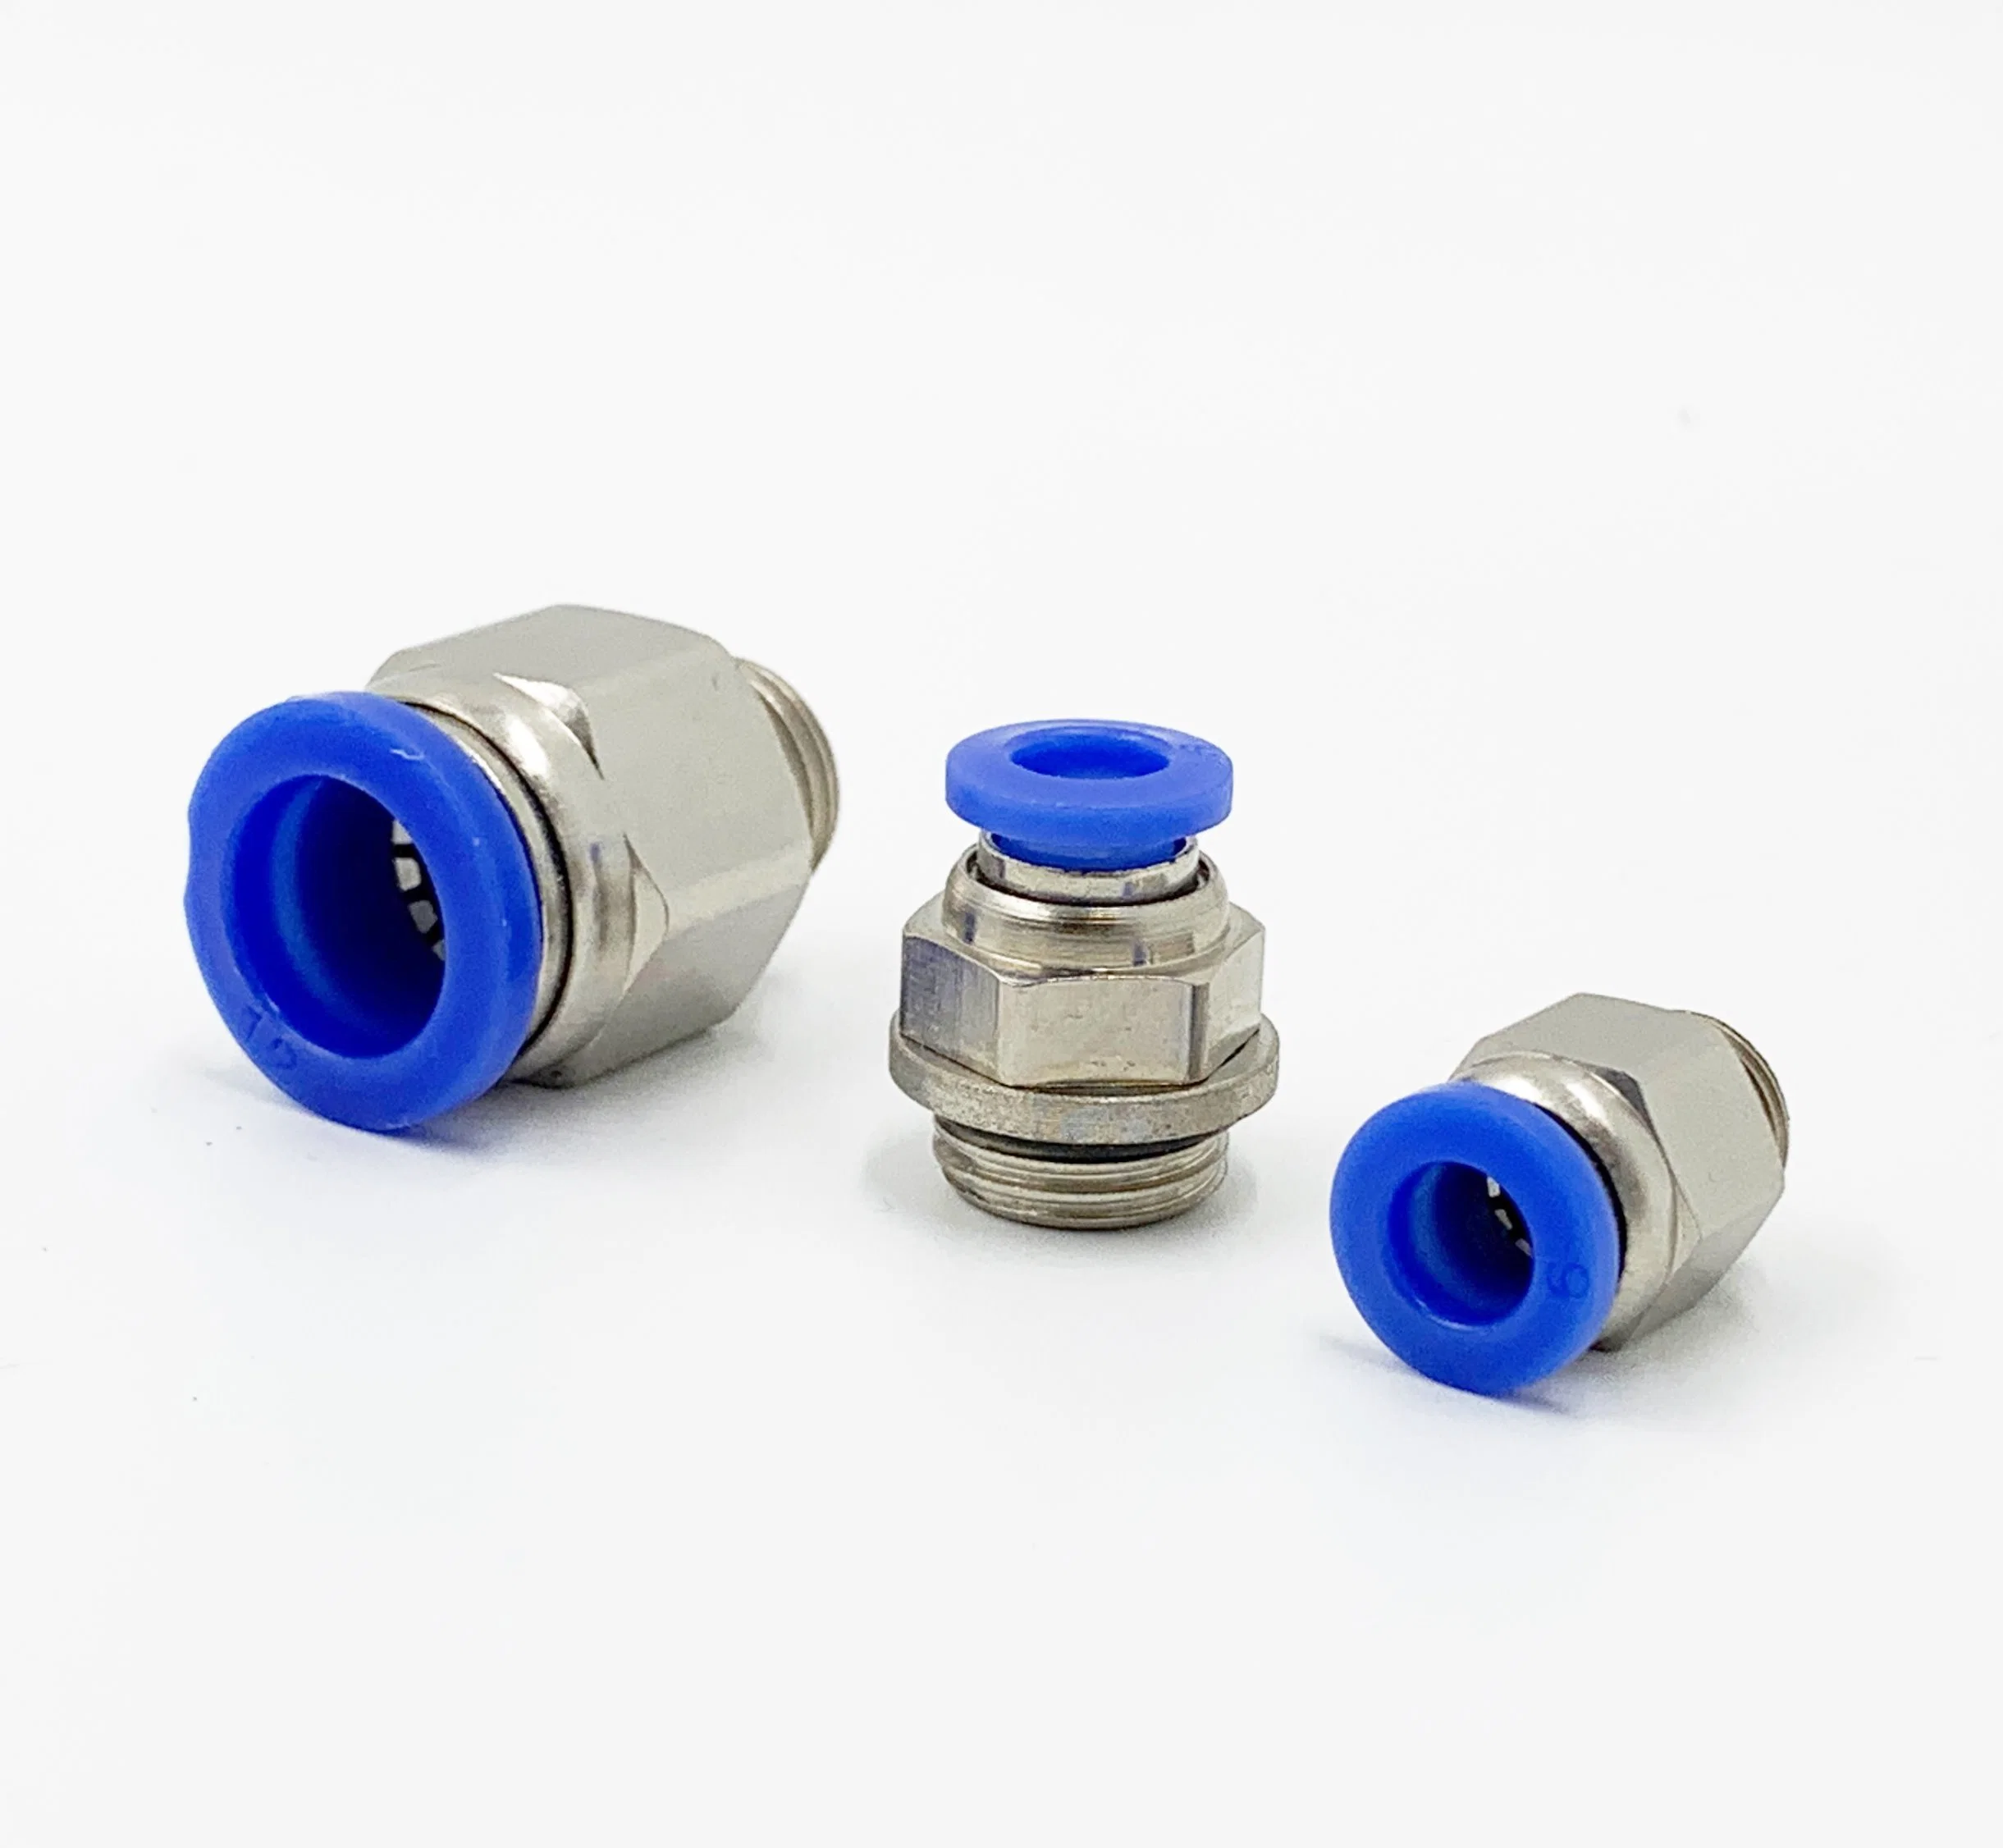 PC16-G03 Quick Connect Pneumatic Air Tube Fitting